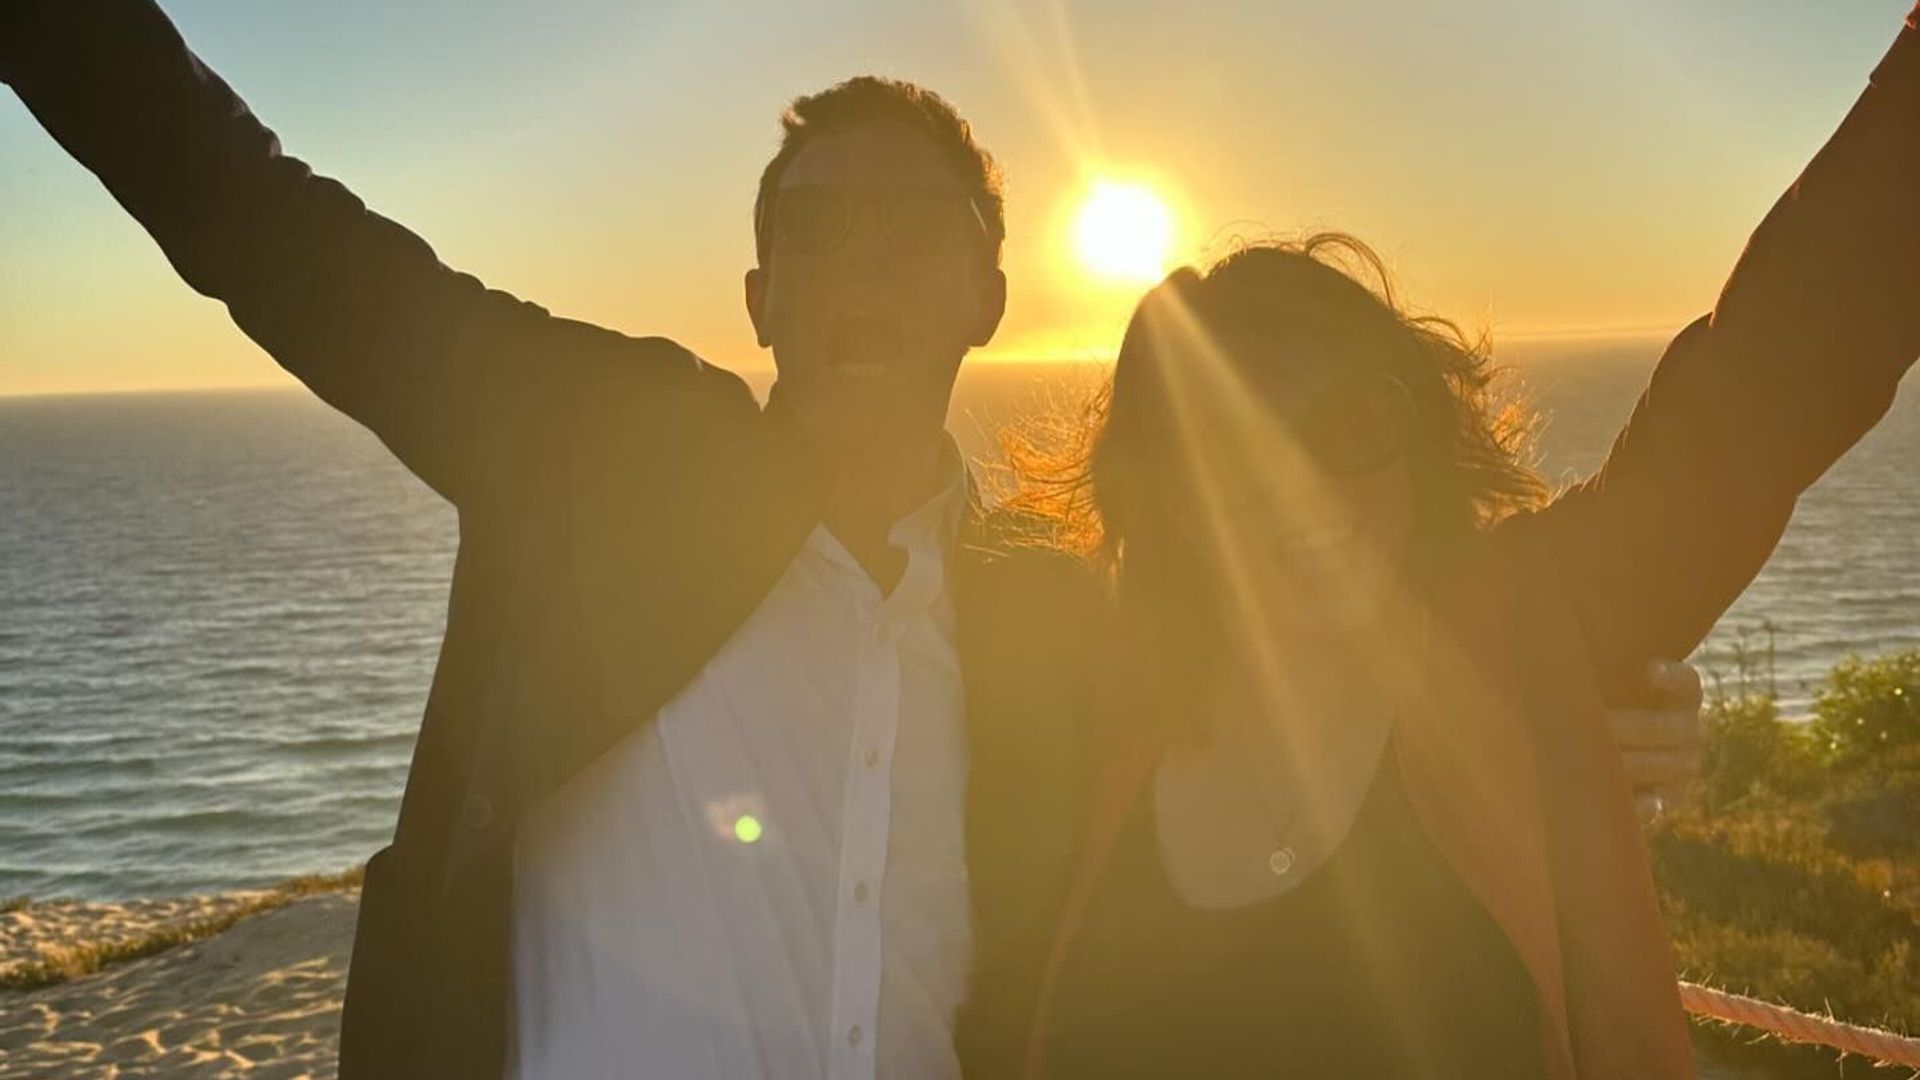 Princess Eugenie and Jack Brooksbank posing in front of a sun setting